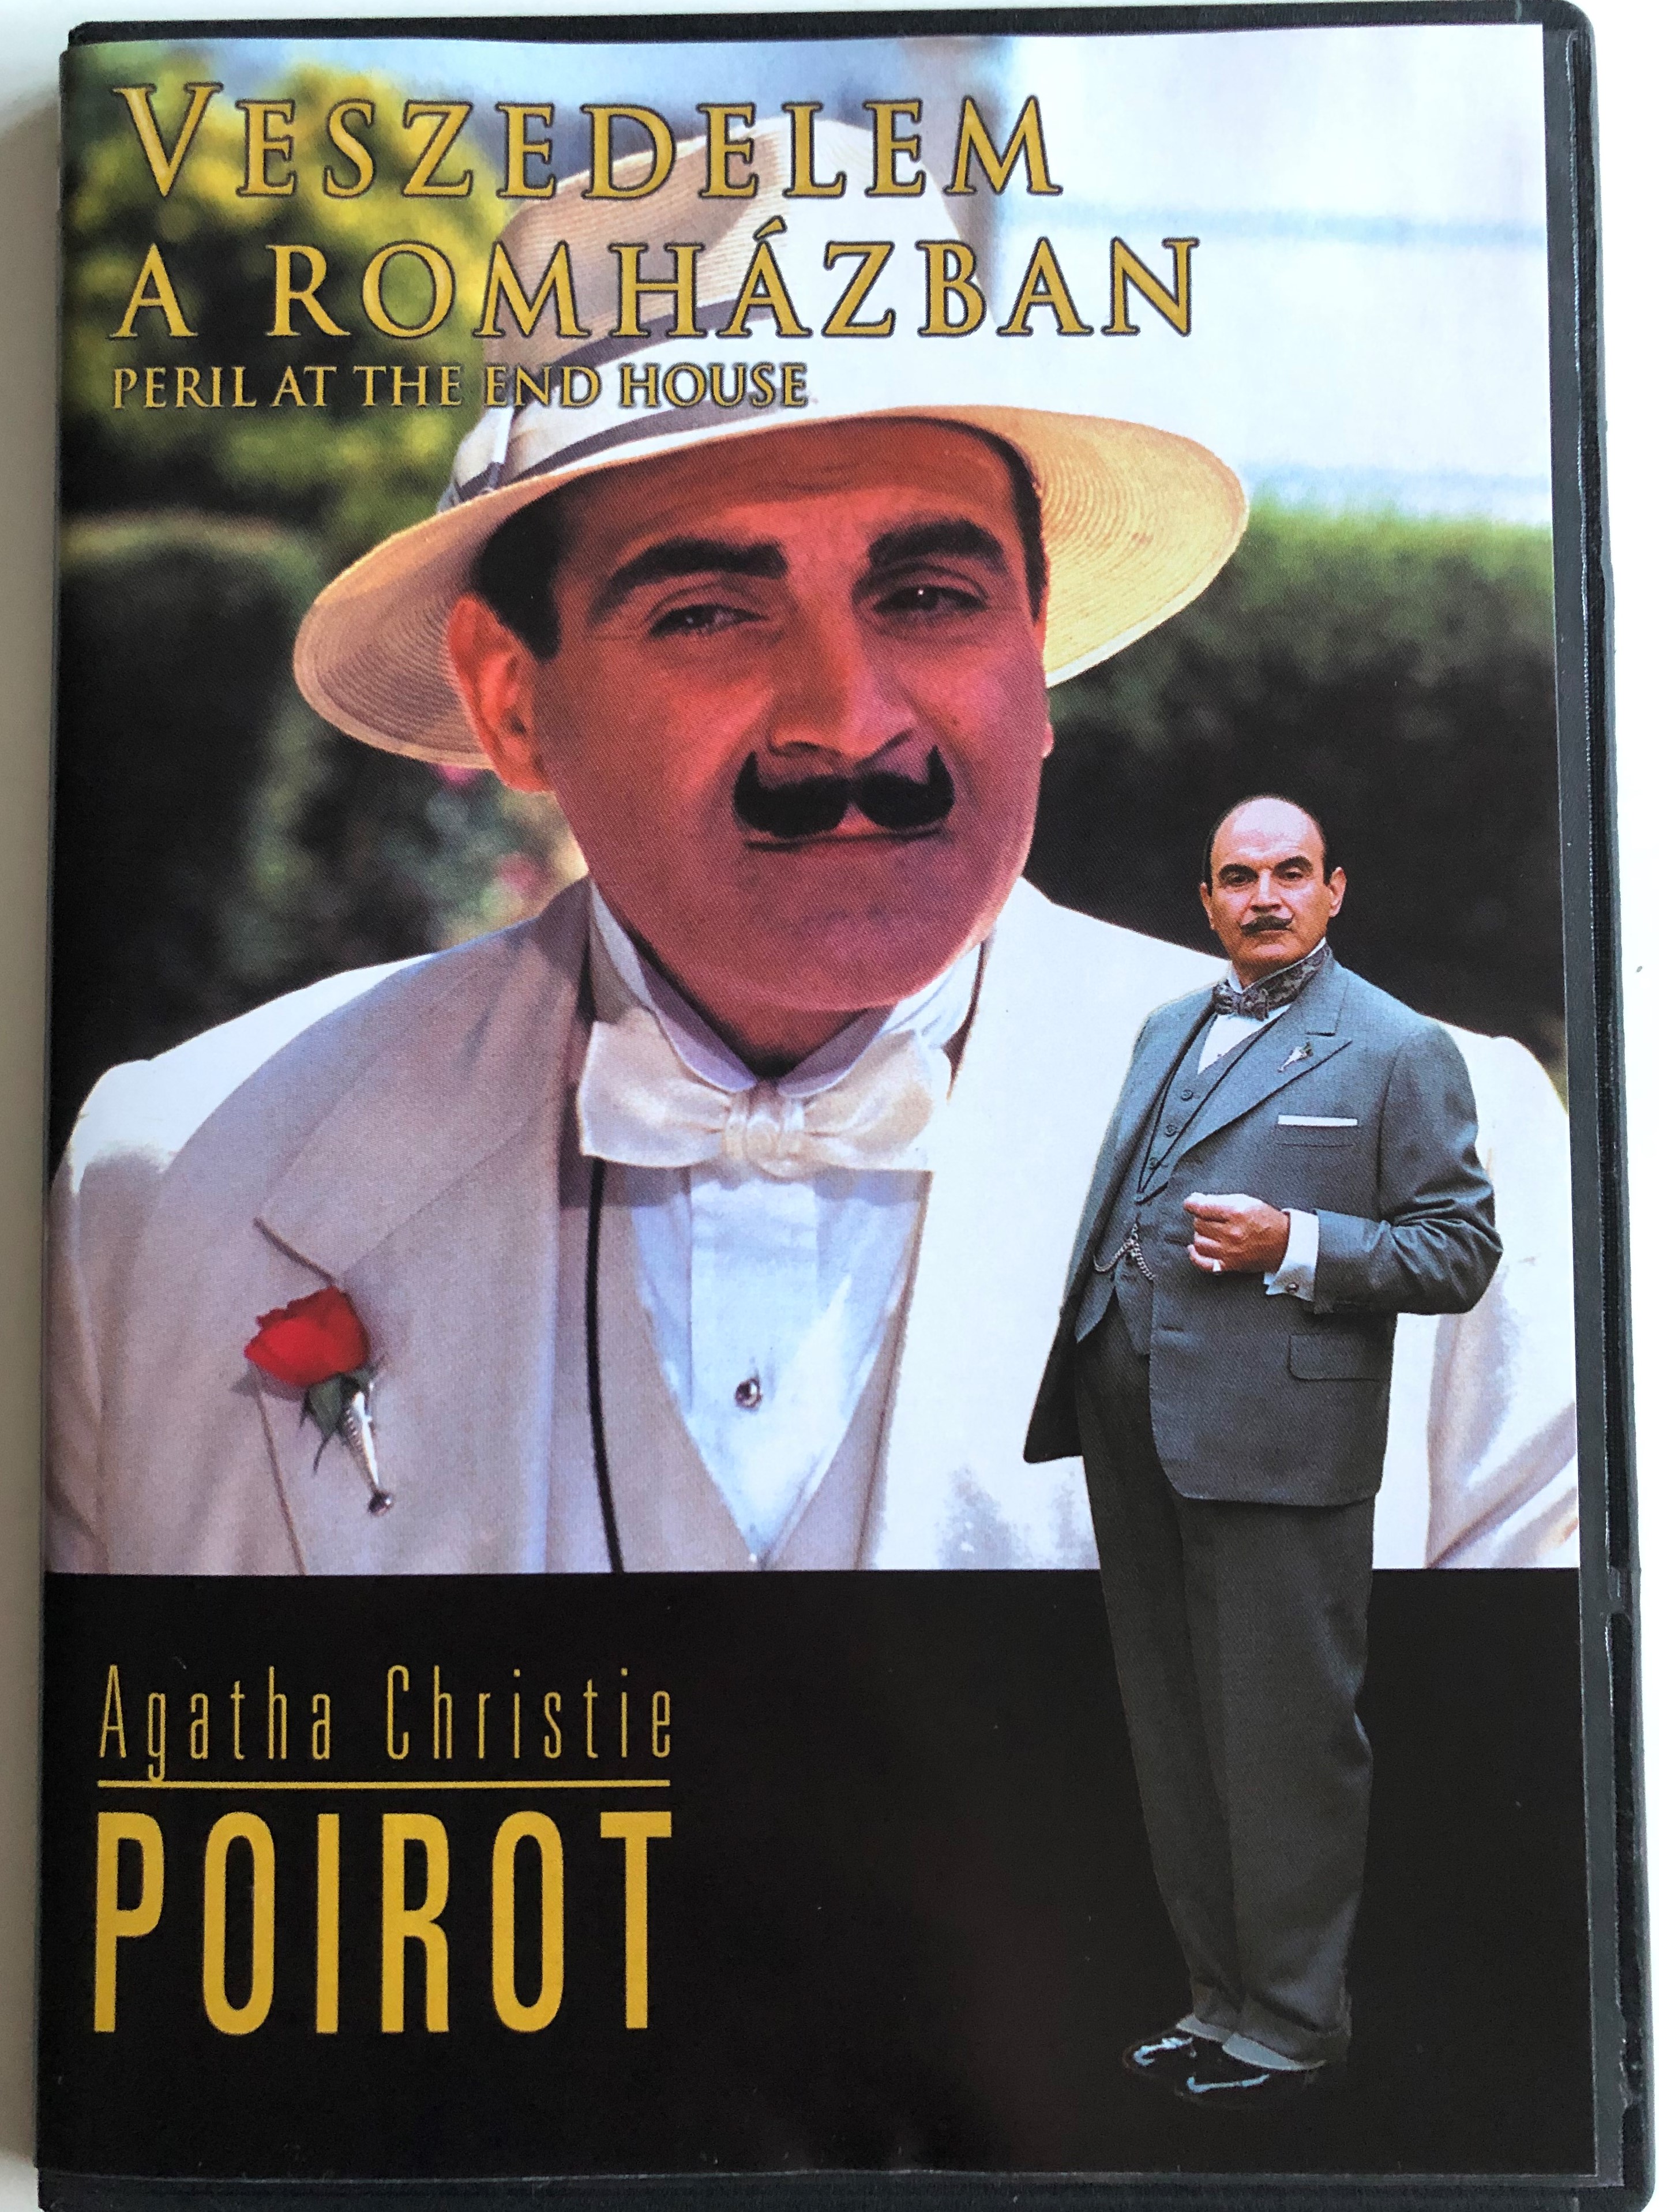 agatha-christie-s-poirot-peril-at-the-end-house-dvd-veszedelem-a-romh-zban-directed-by-clive-exton-1-.jpg